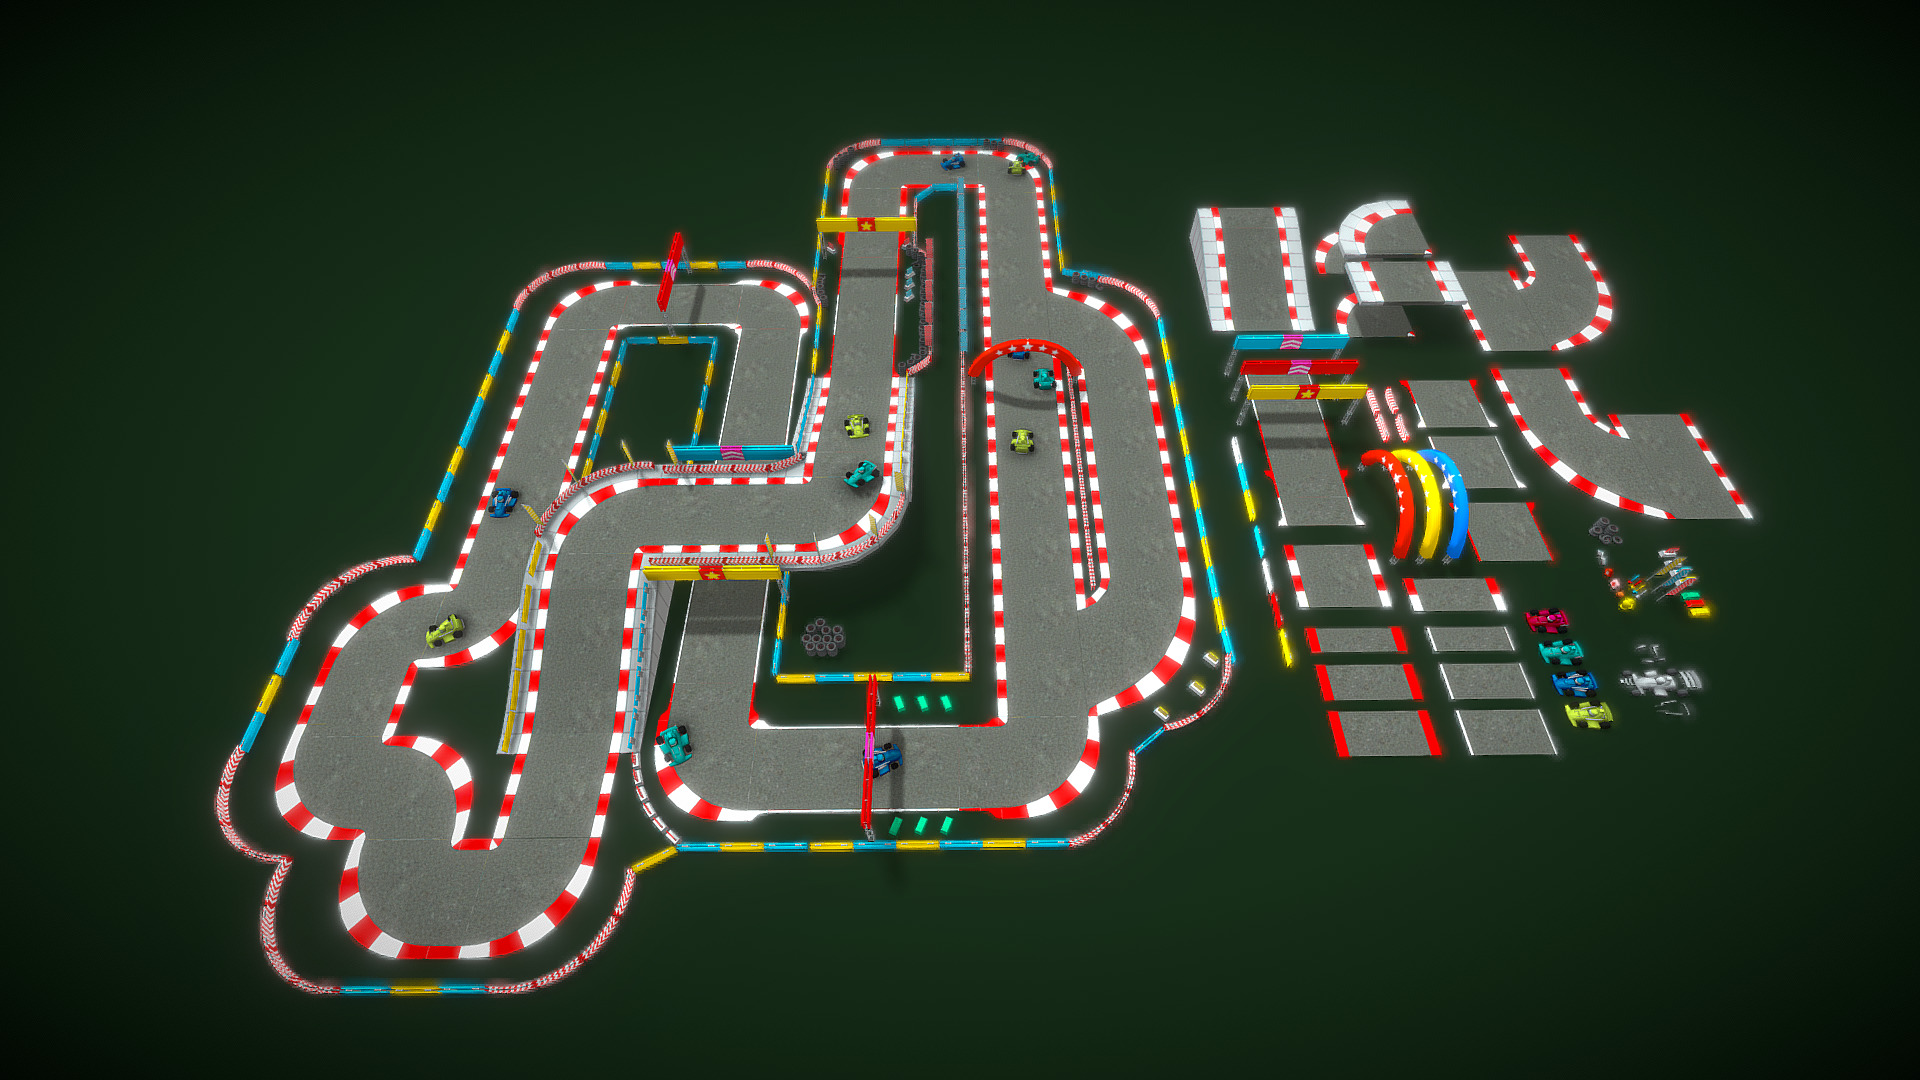 3D model Modular Lowpoly Circuit Asset GoKart Racing - This is a 3D model of the Modular Lowpoly Circuit Asset GoKart Racing. The 3D model is about a circuit board with many wires.